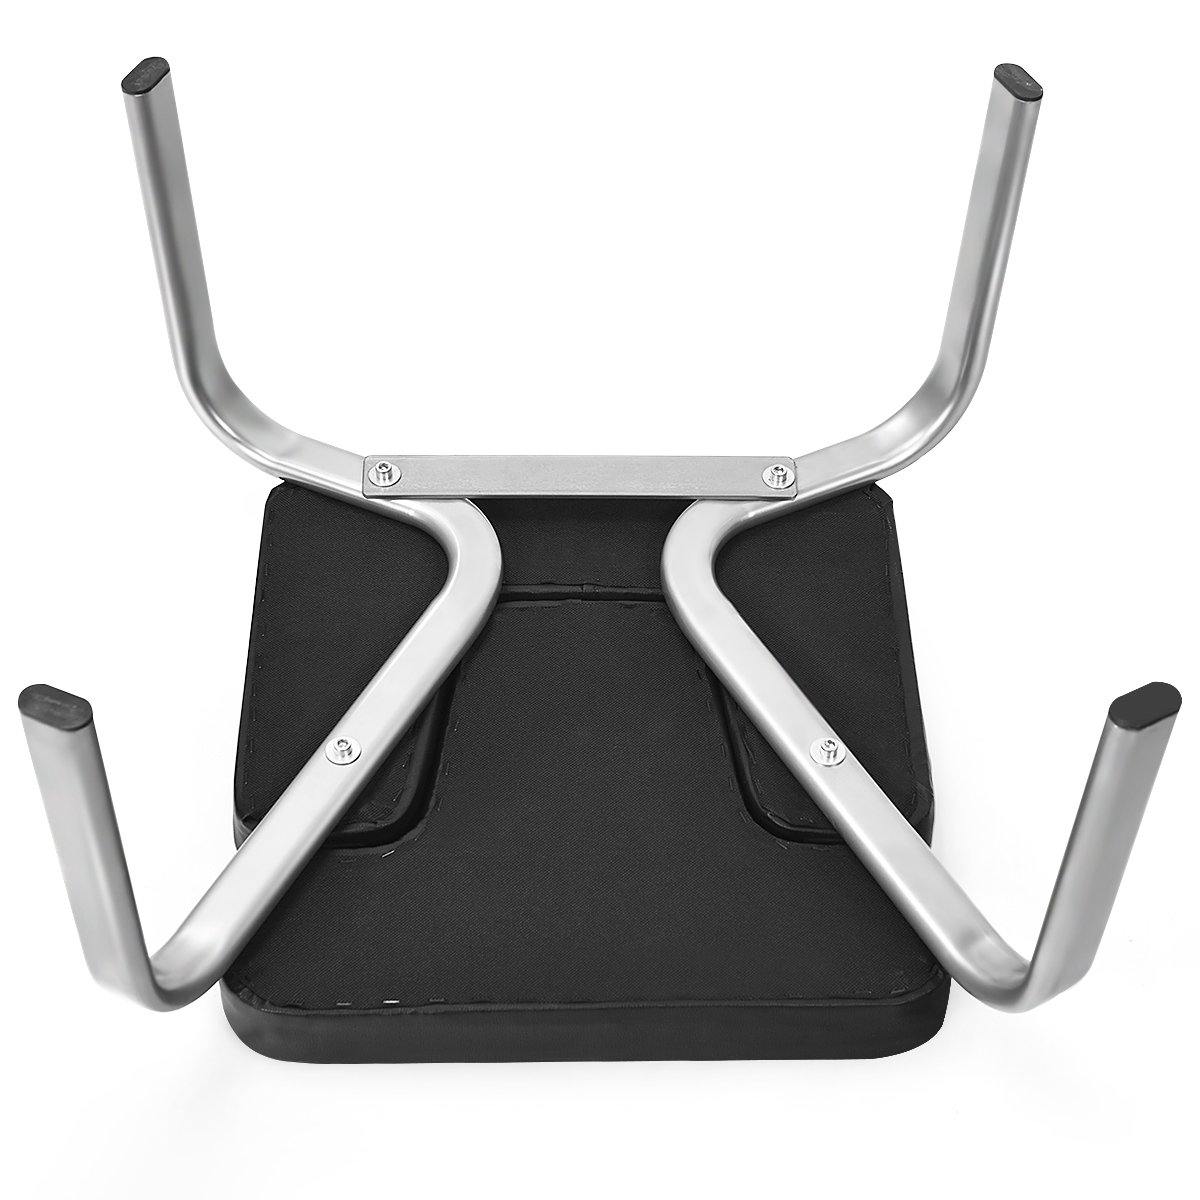 Giantex Yoga Inversion Chair, with VC Pads, Metal Legs, Up to 440 Lbs, Black - Giantexus